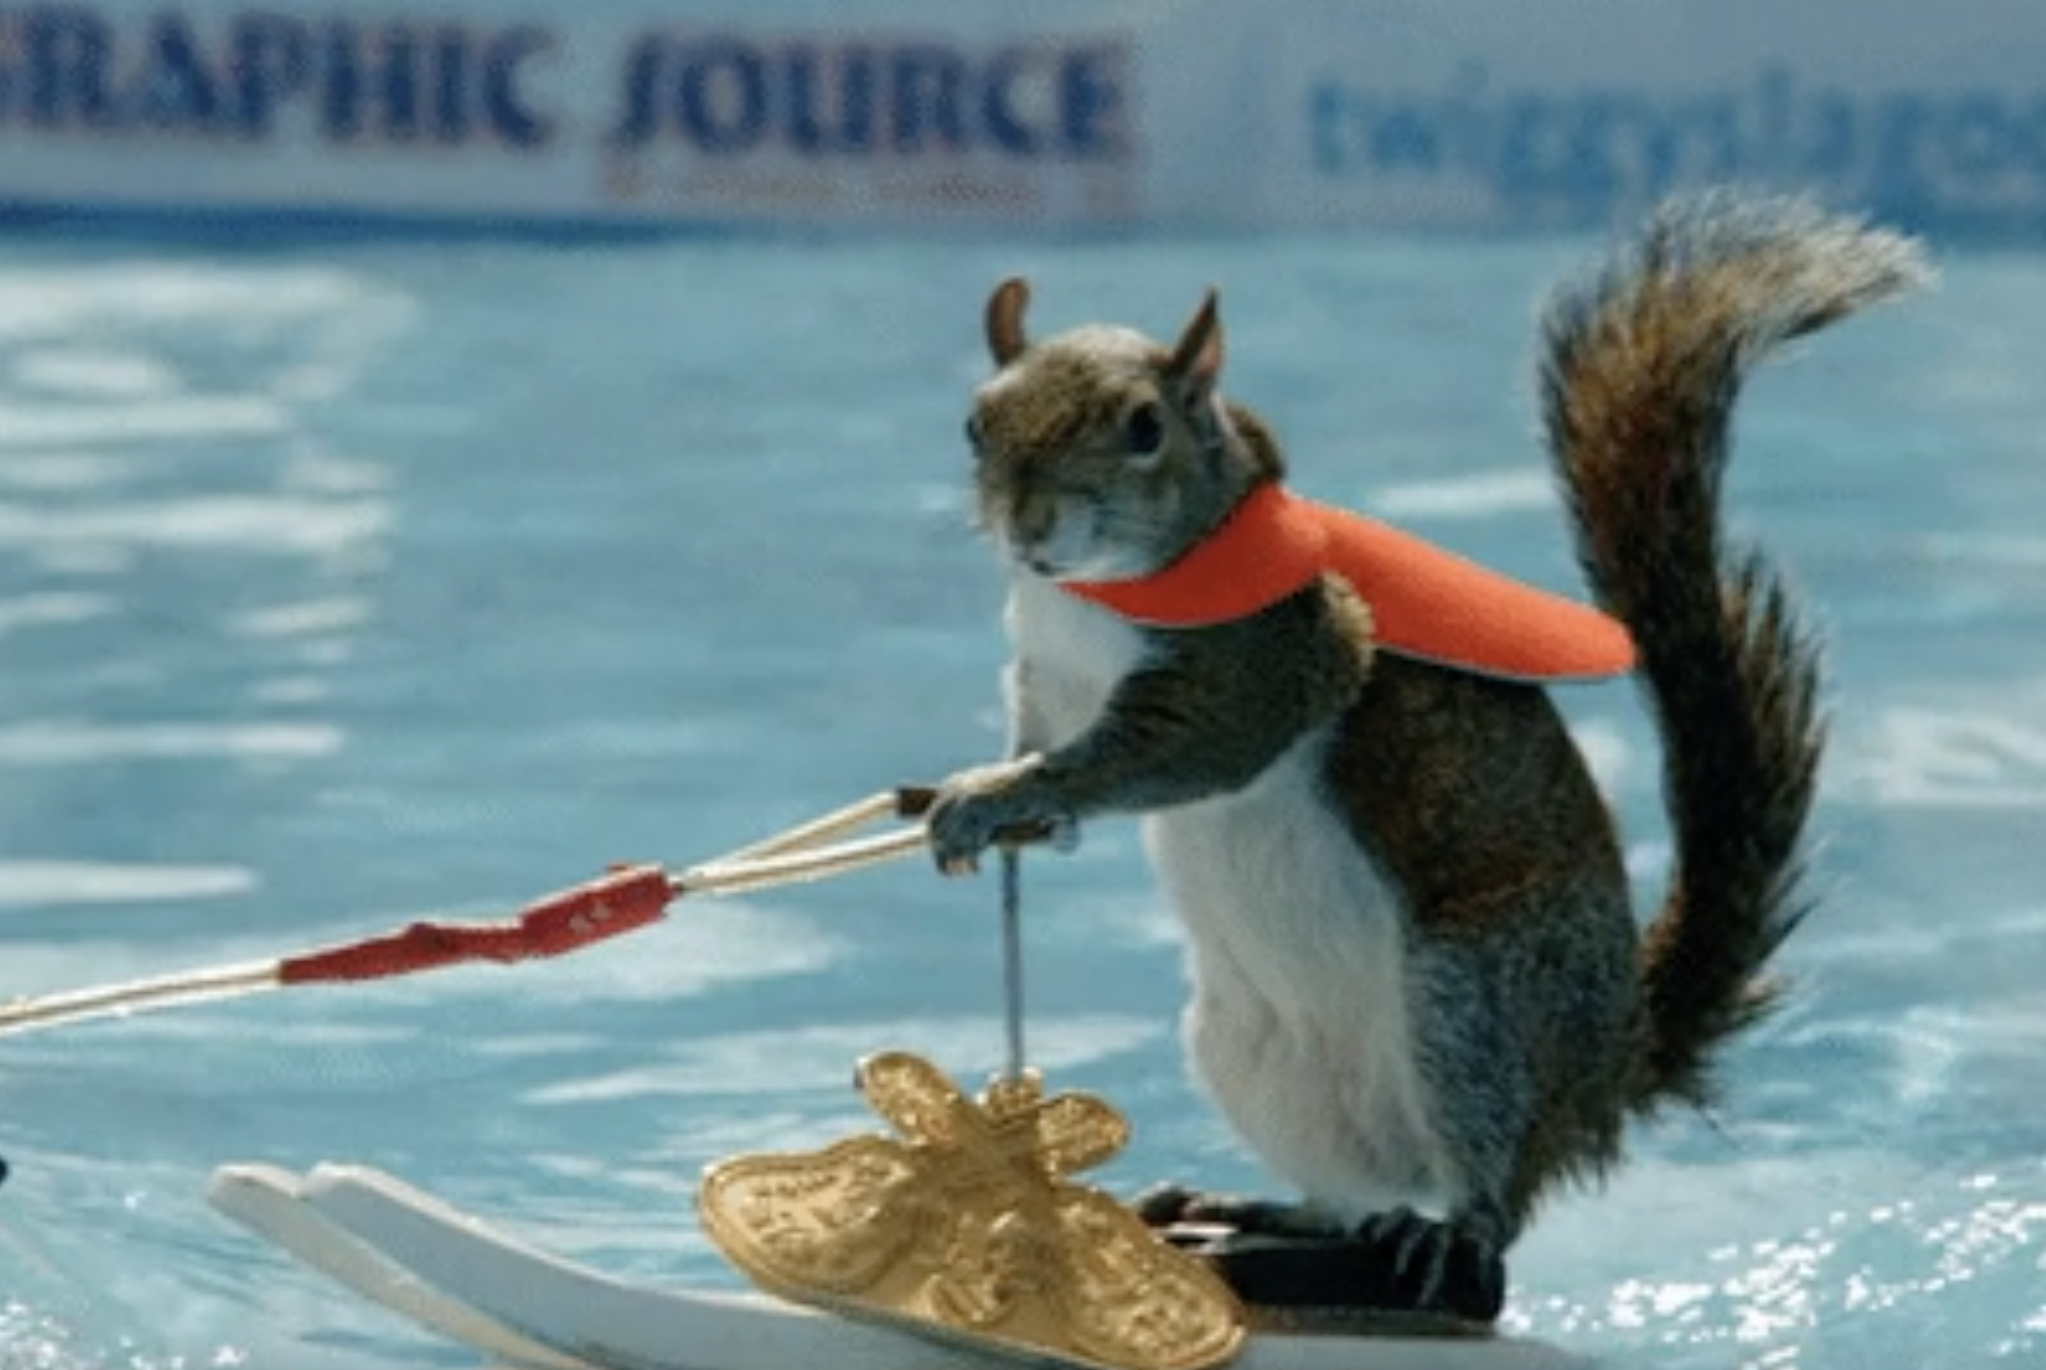 A squirrel skiing